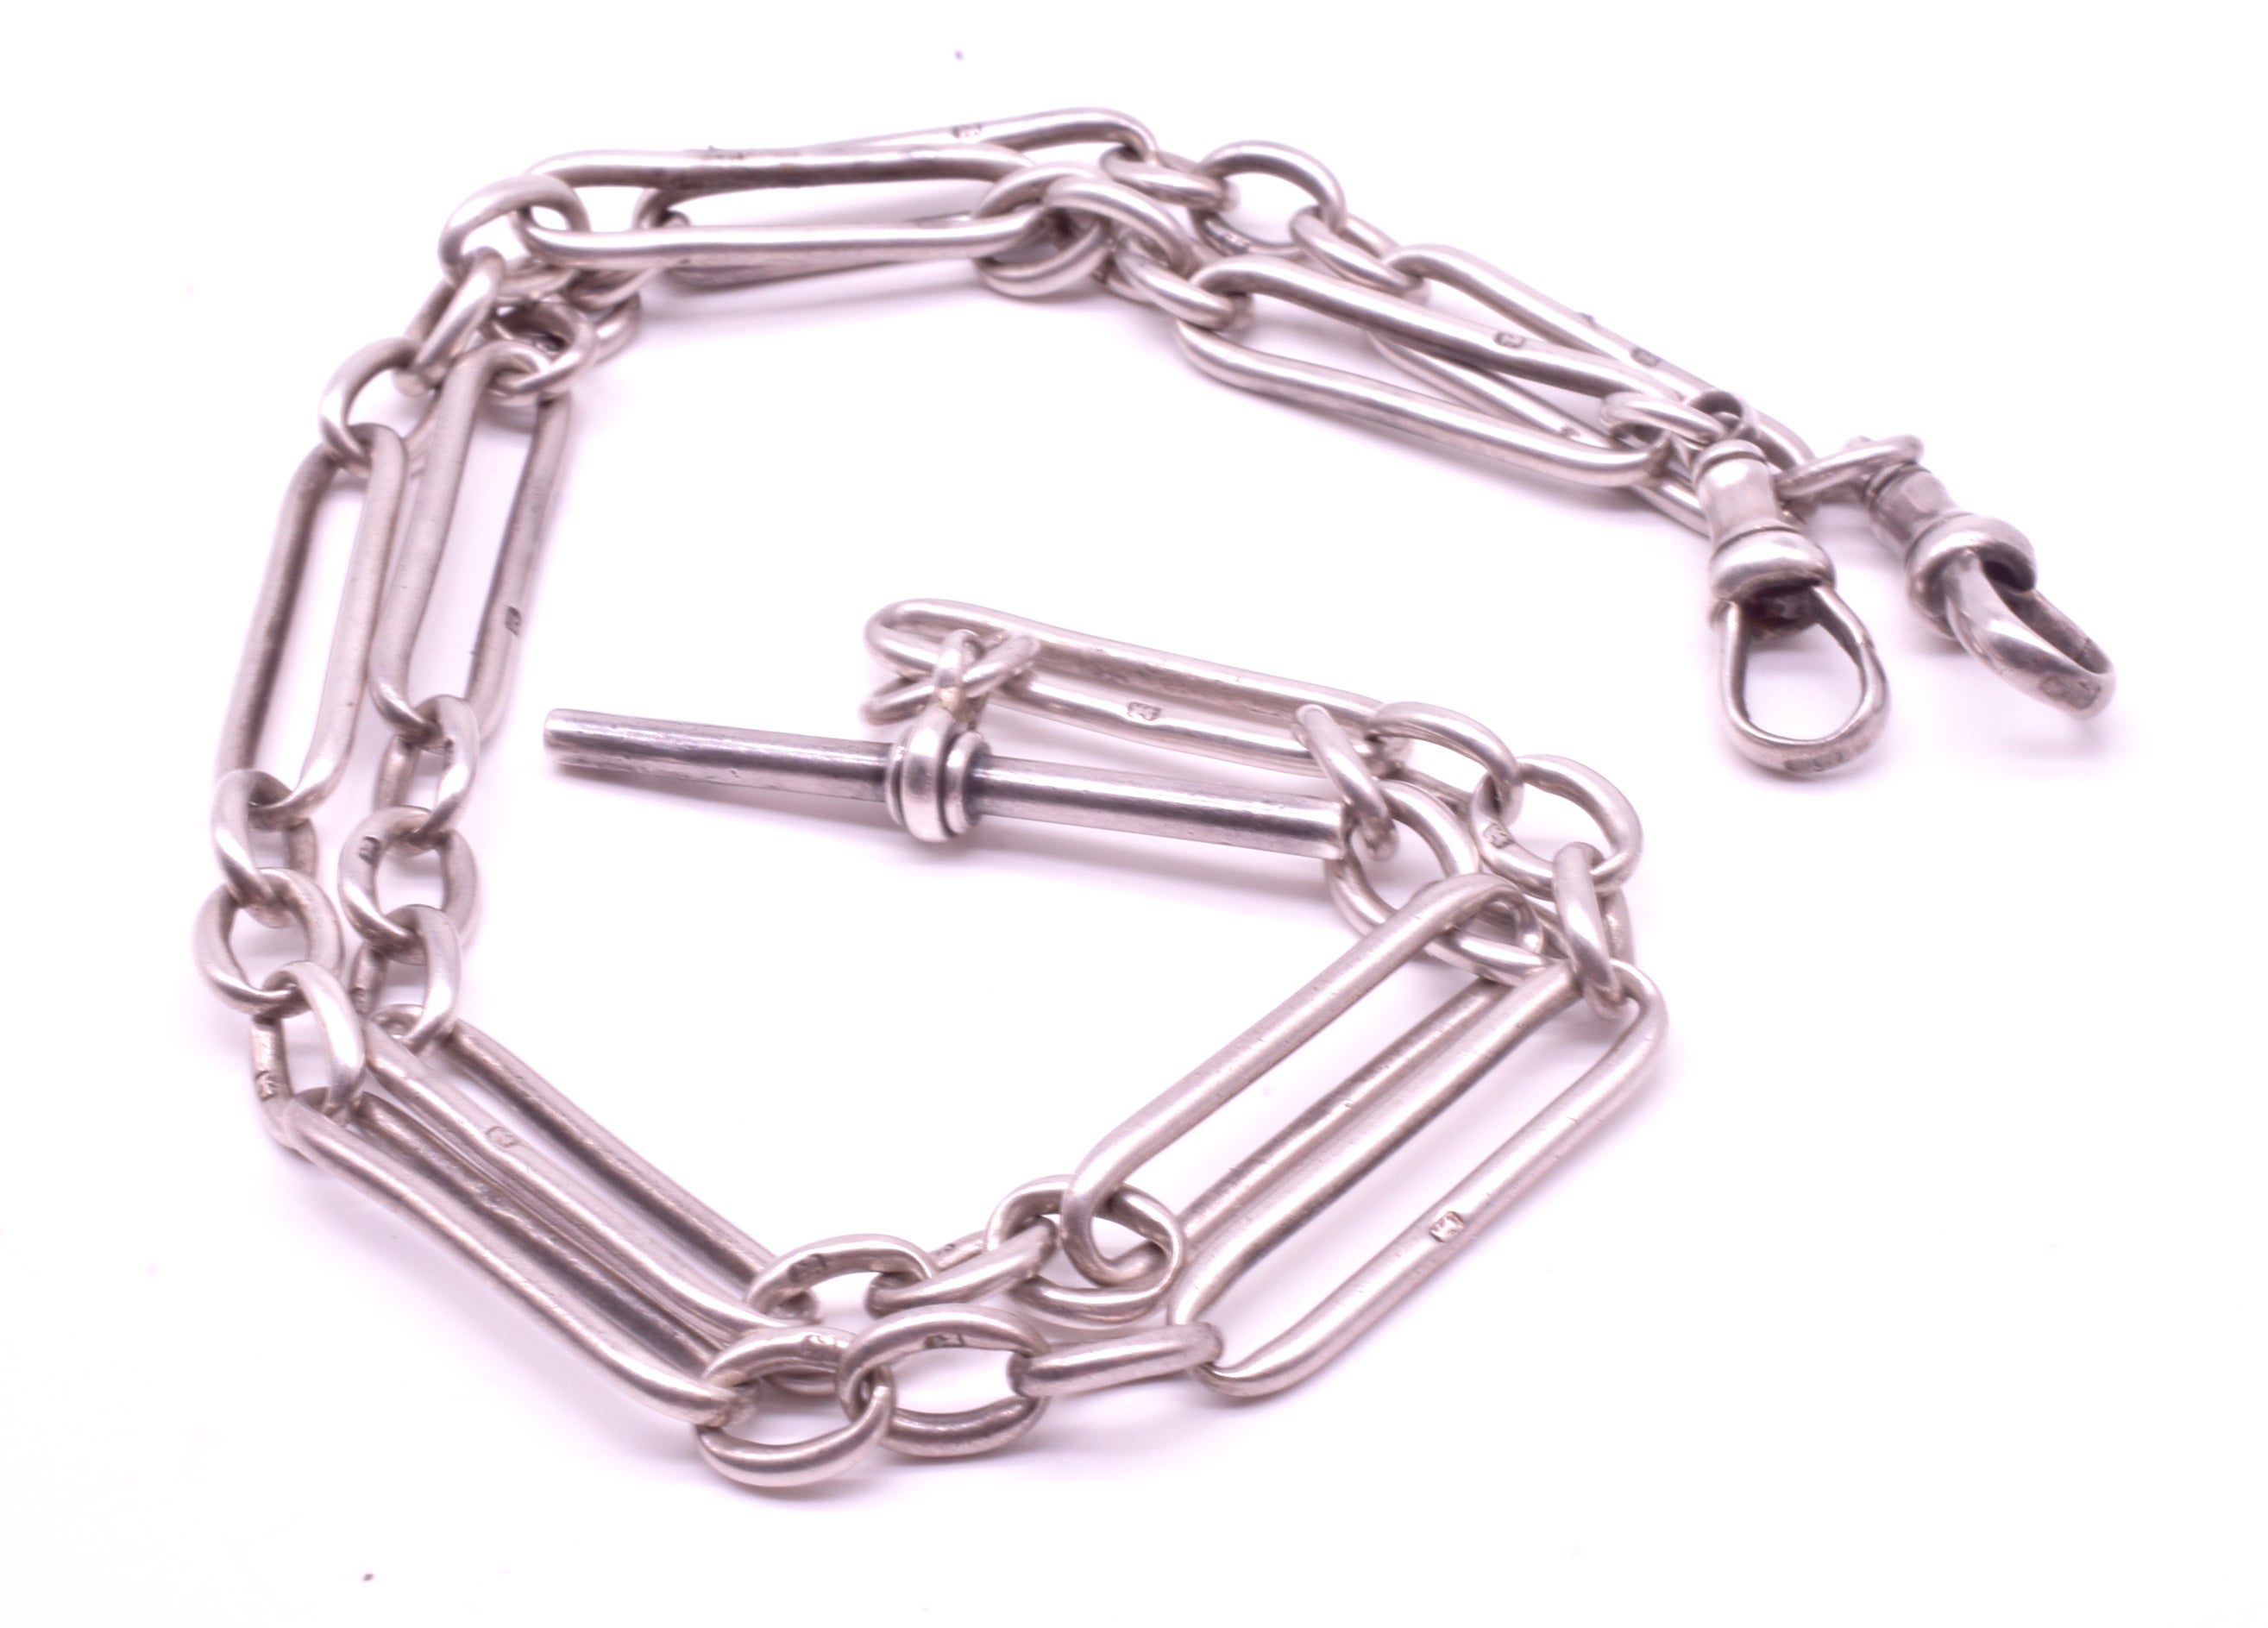 Lovely Victorian sterling silver Albert Link Chain with attached T BAR and 2 dog tag clips from which to attach your favorite locket or pendant or pocket watch. The chain is stamped on every link with the Lion Passant stamp, indicating sterling of